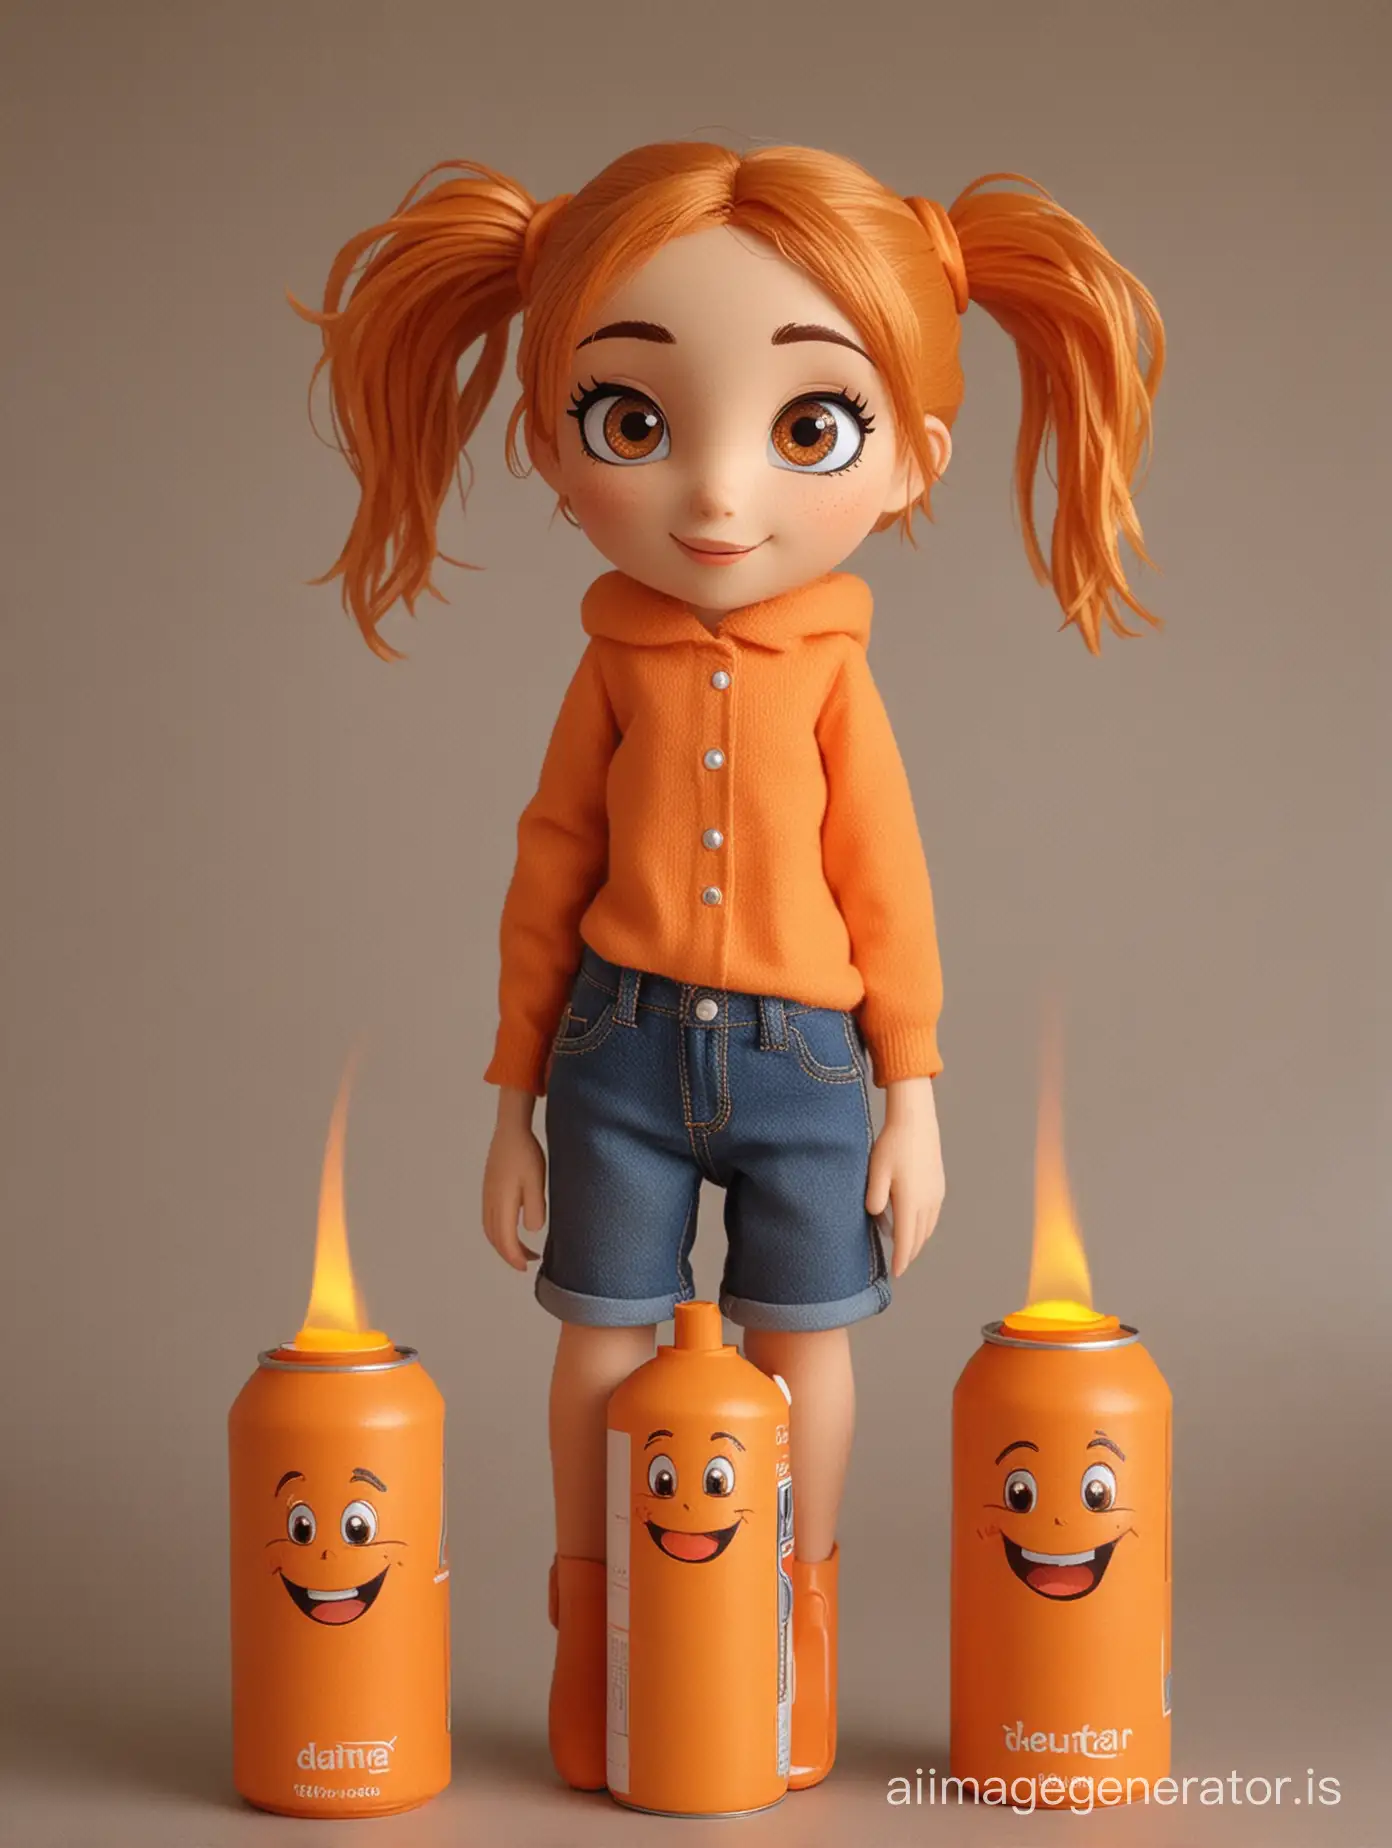 Make an orange butane cylinder that is a girl with a very kind and affectionate face